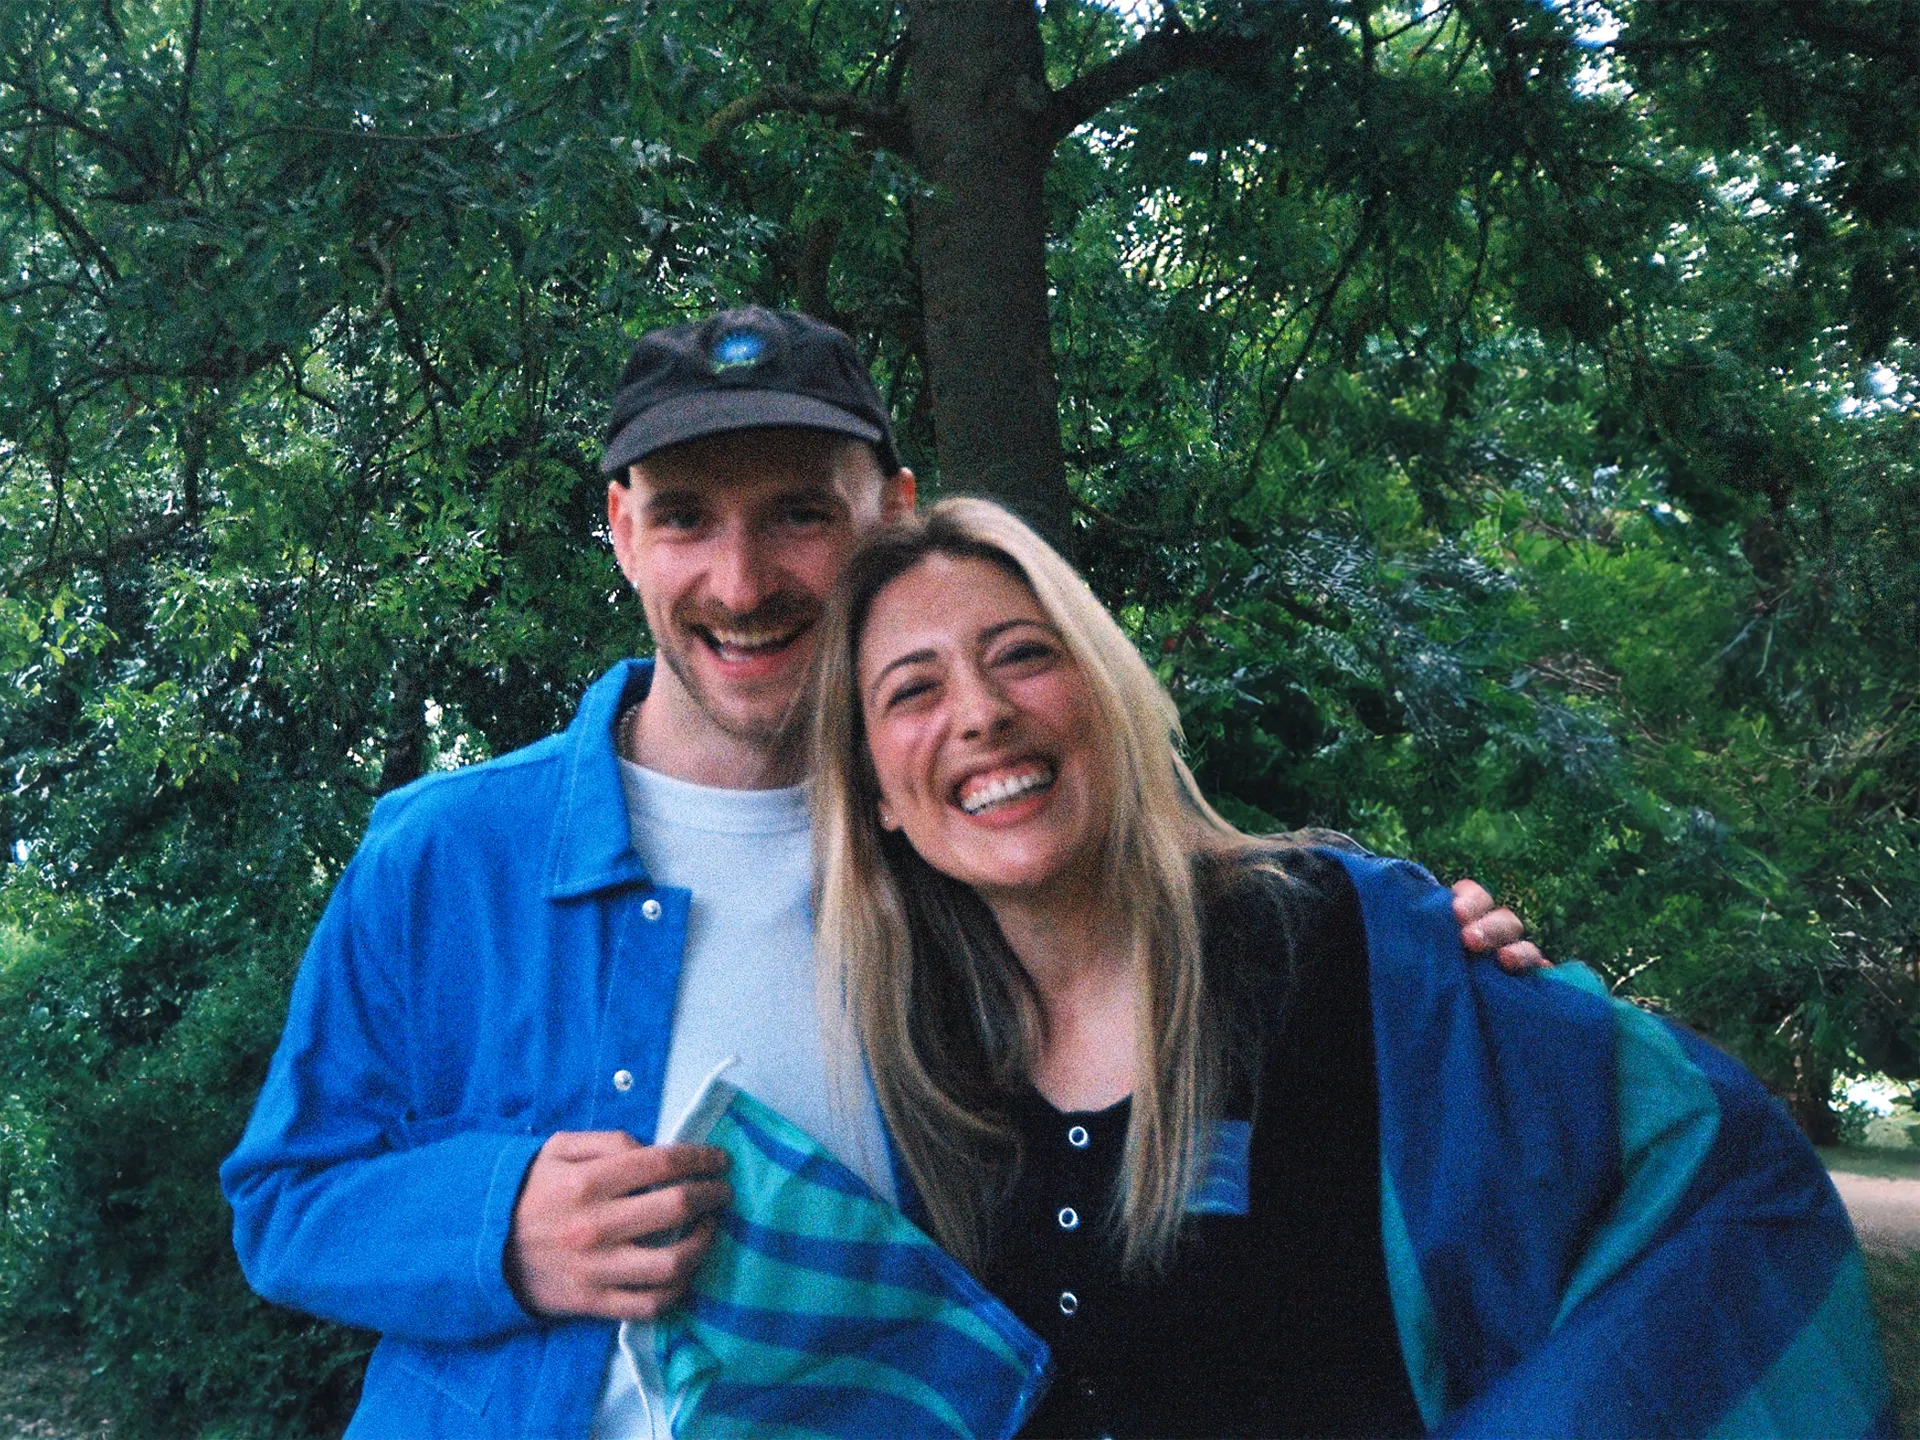 A smiling man and woman have their arms wrapped around each other. They are holding small flags of seagreen and ultramarine blue waves.